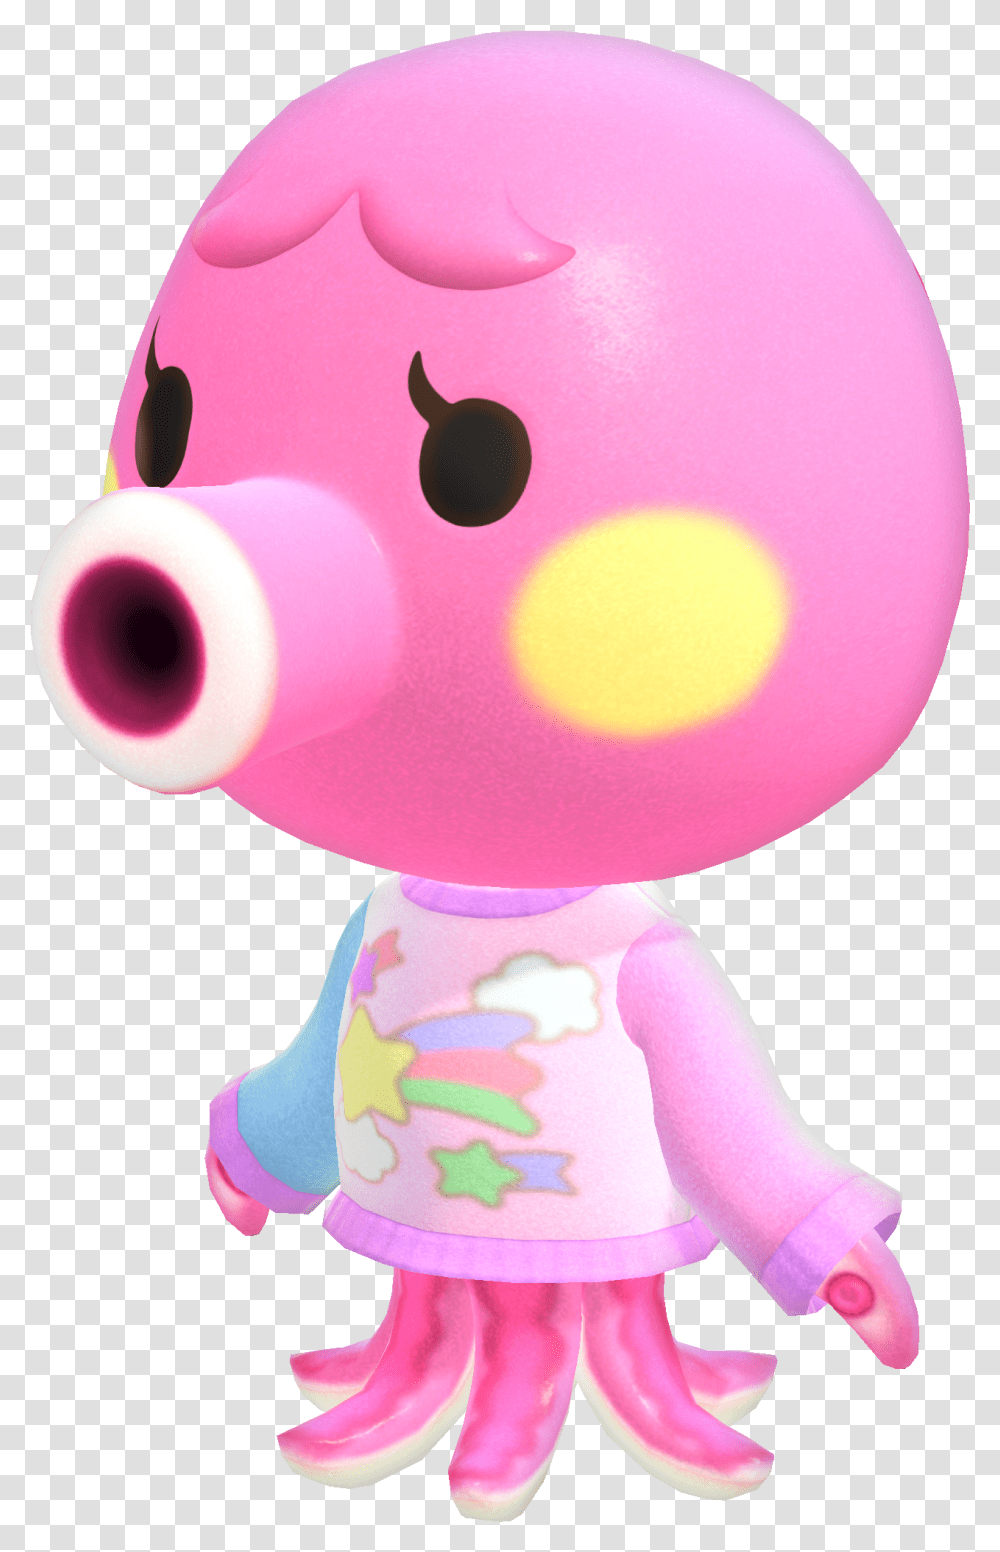 Animal Crossing Wiki Animal Crossing New Horizons Villagers, Piggy Bank, Balloon, Toy Transparent Png